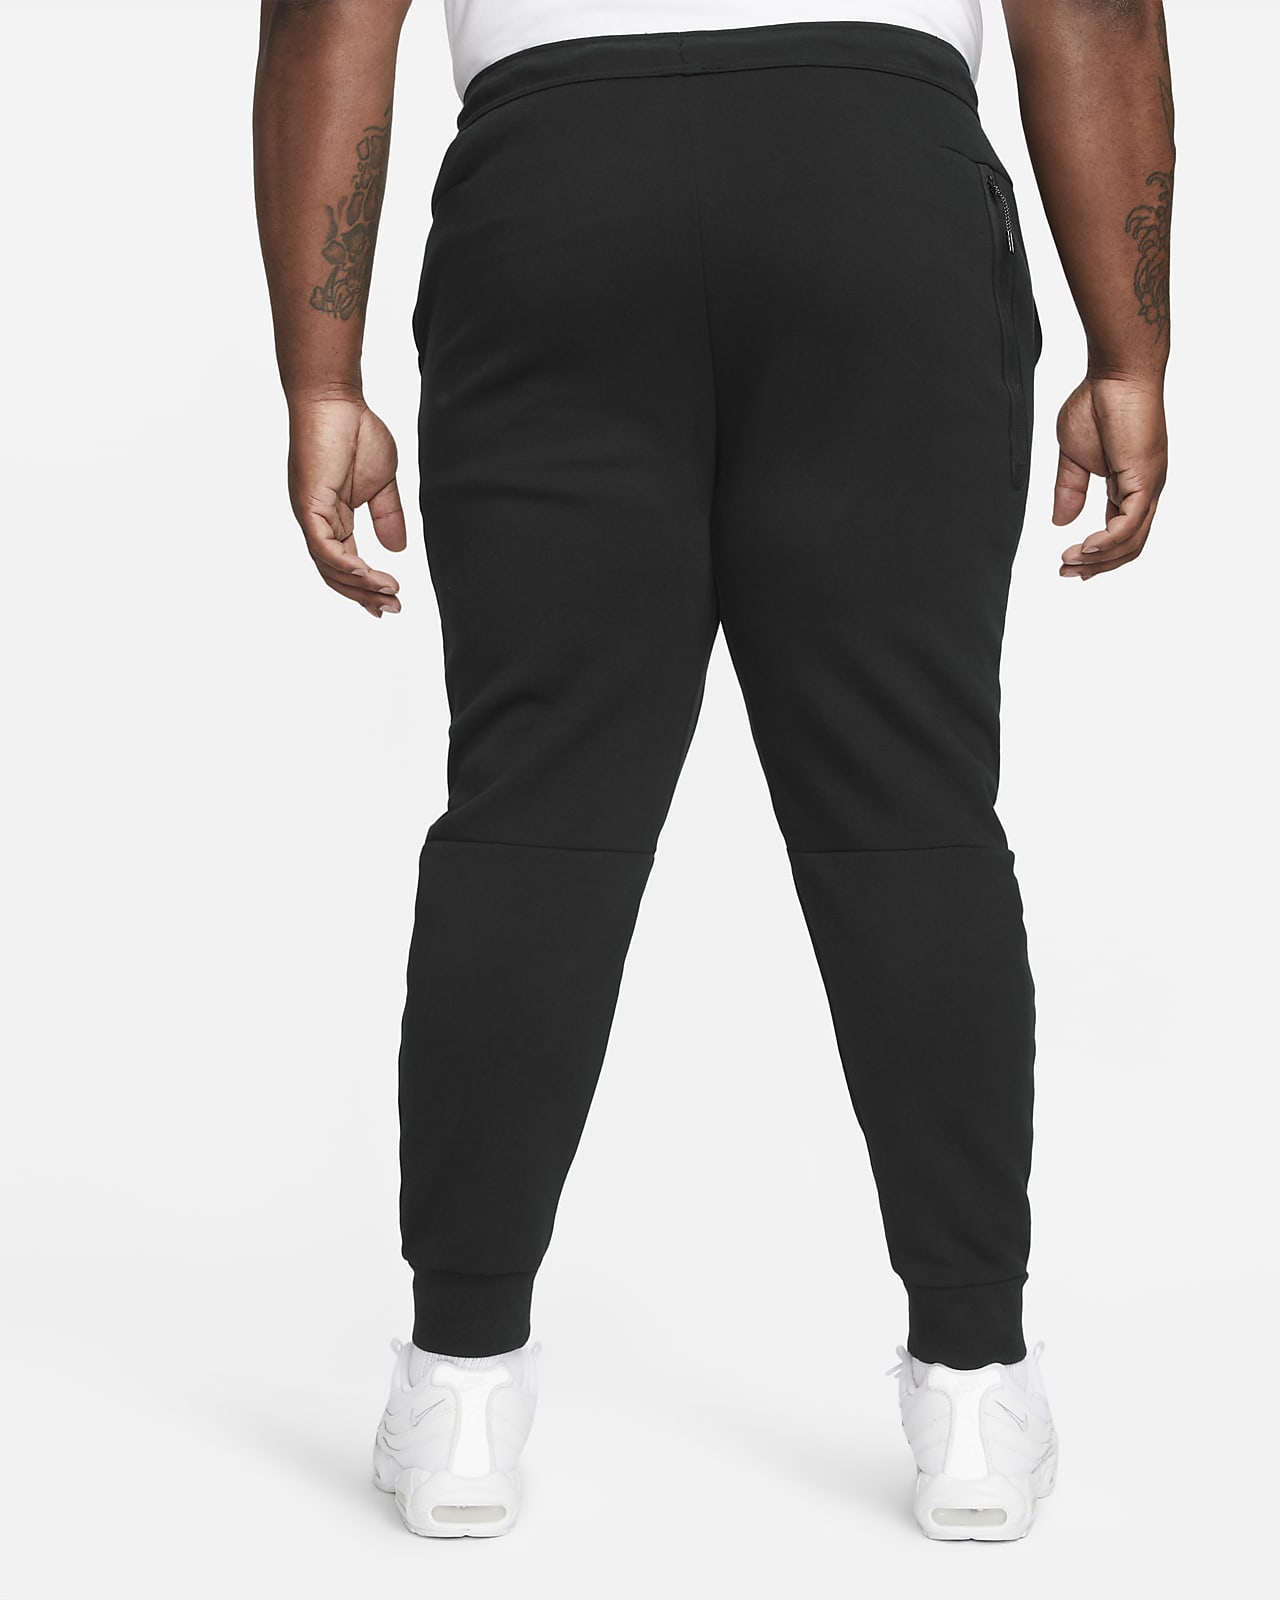 Nke Tech Fleece Mens Jogger Black/Anthracite_ Grey  Size XL/XXL Tapered Fit SALE 